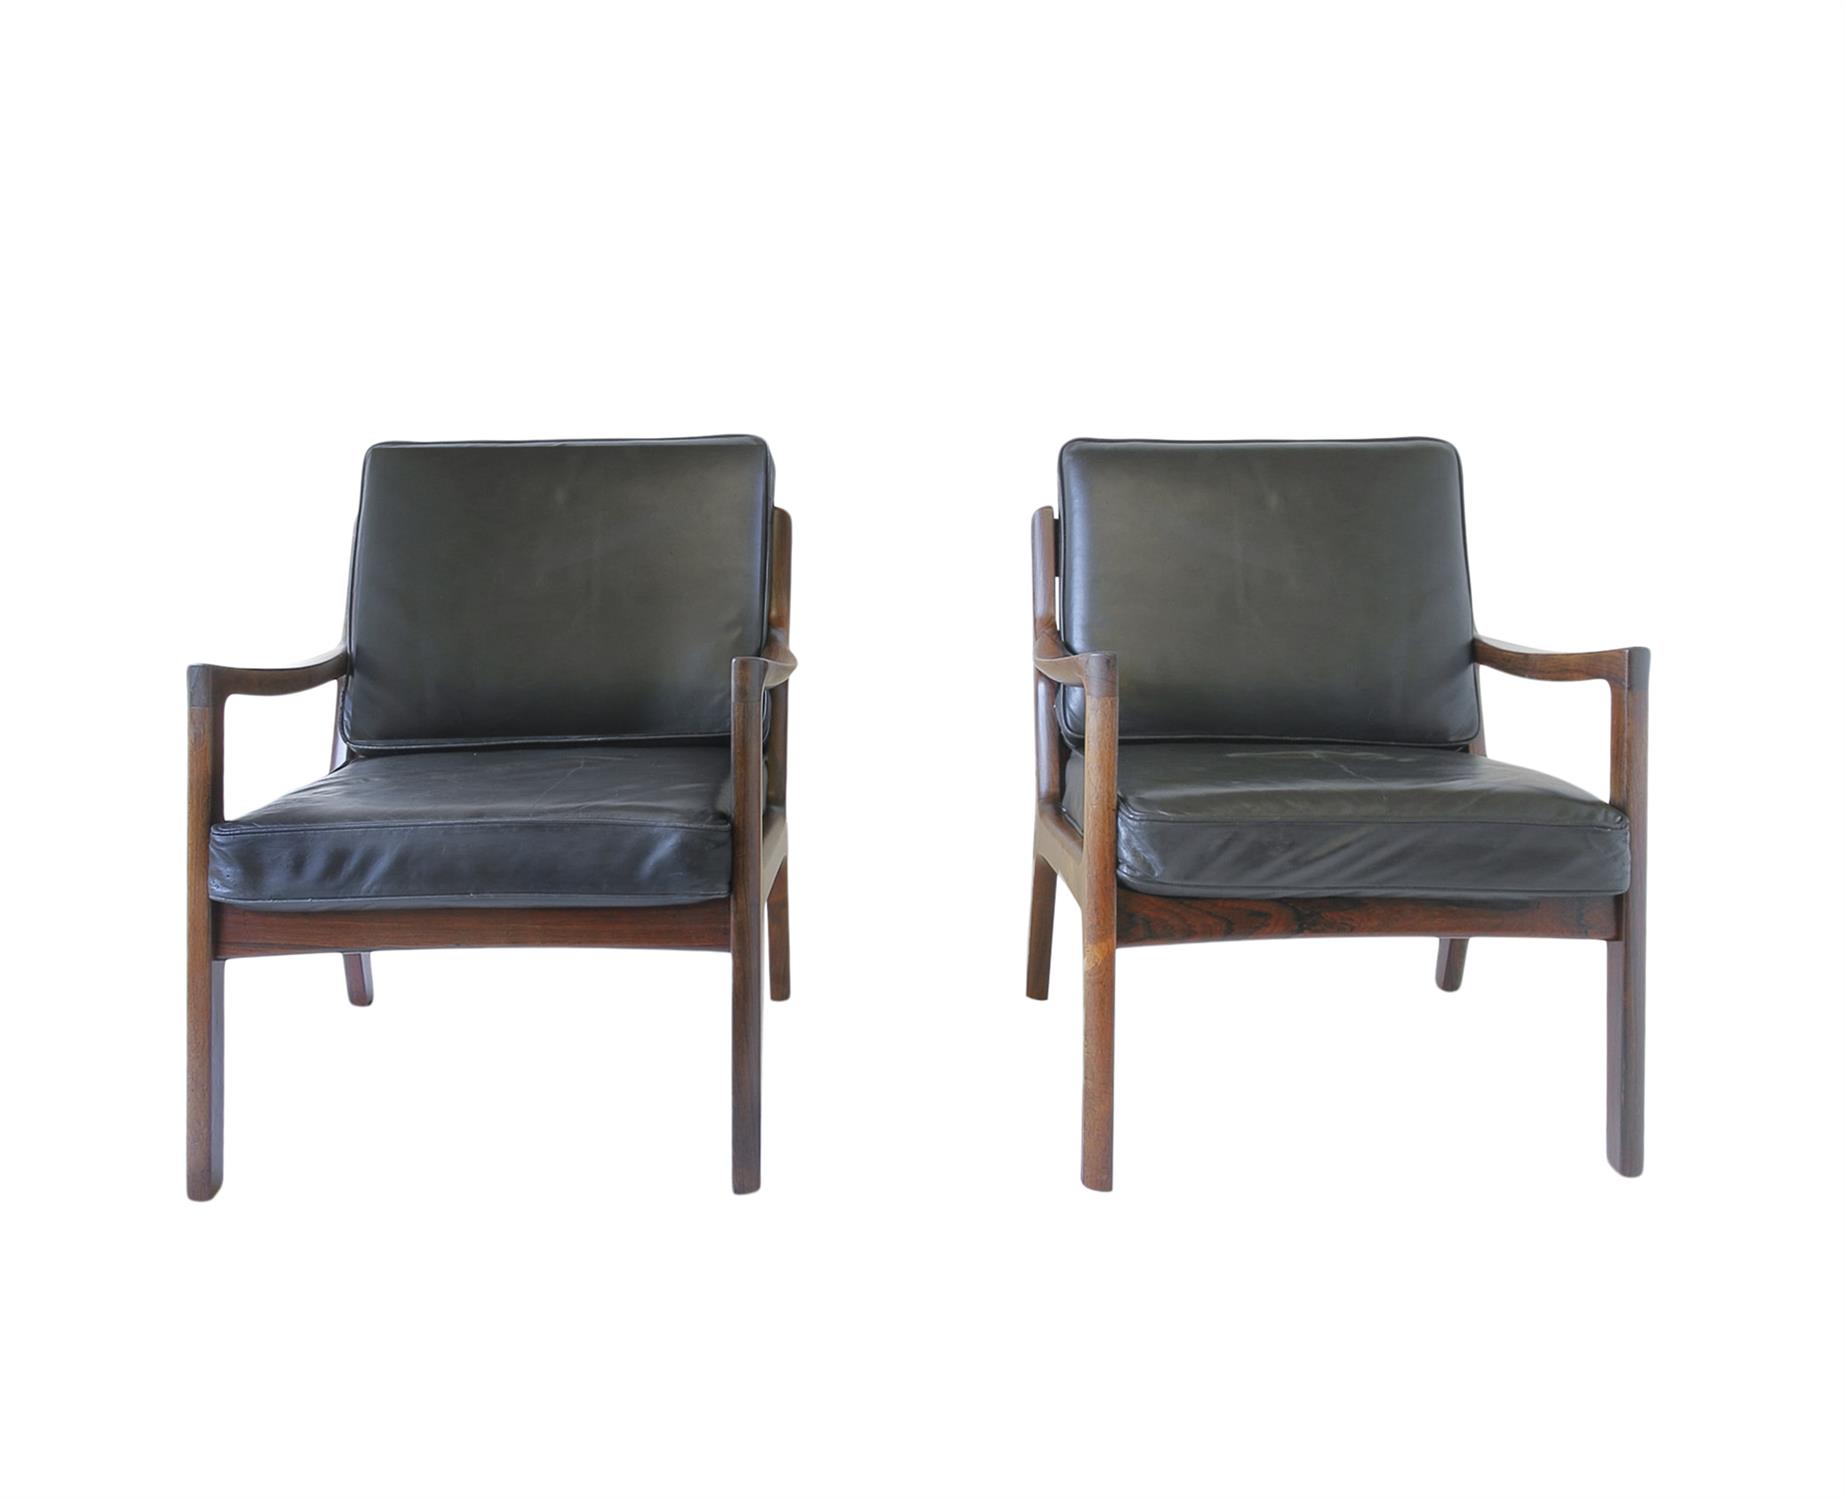 OLE WANSCHER A pair of Senator lounge chairs by Ole Wanscher, produced by France & Sons. Denmark, - Image 2 of 6